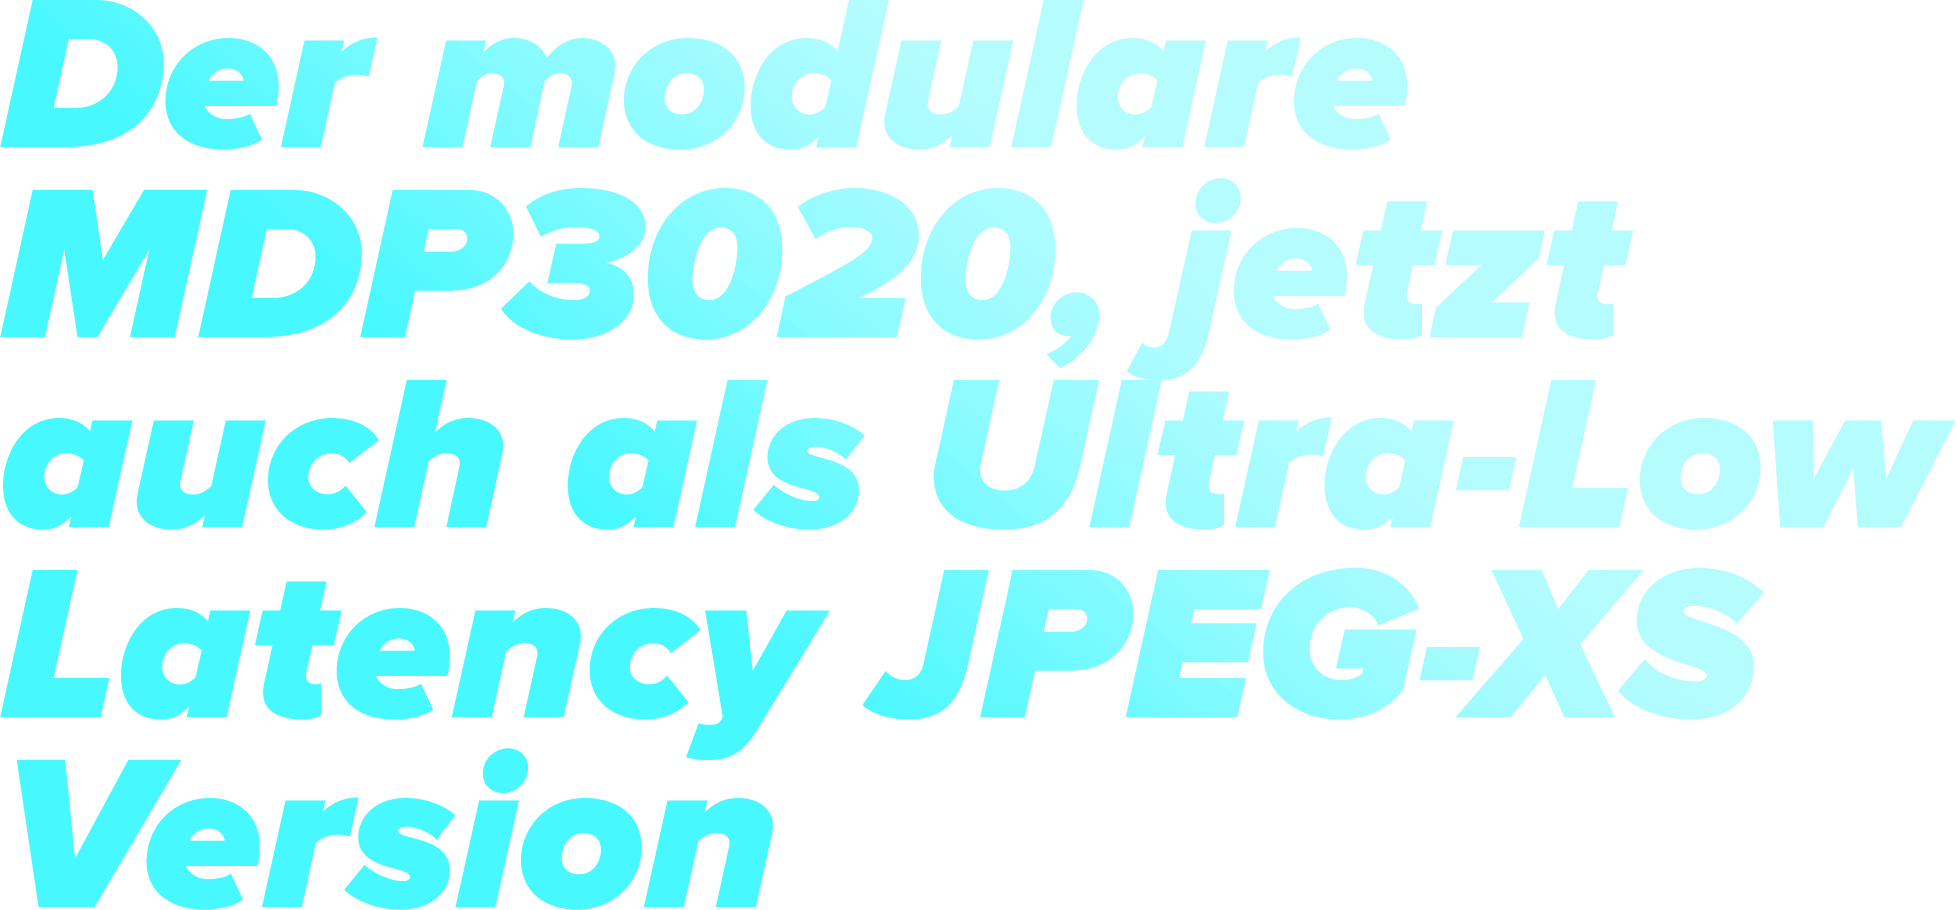 The modular MDP3020, now with ultra low latency JPEG-XS